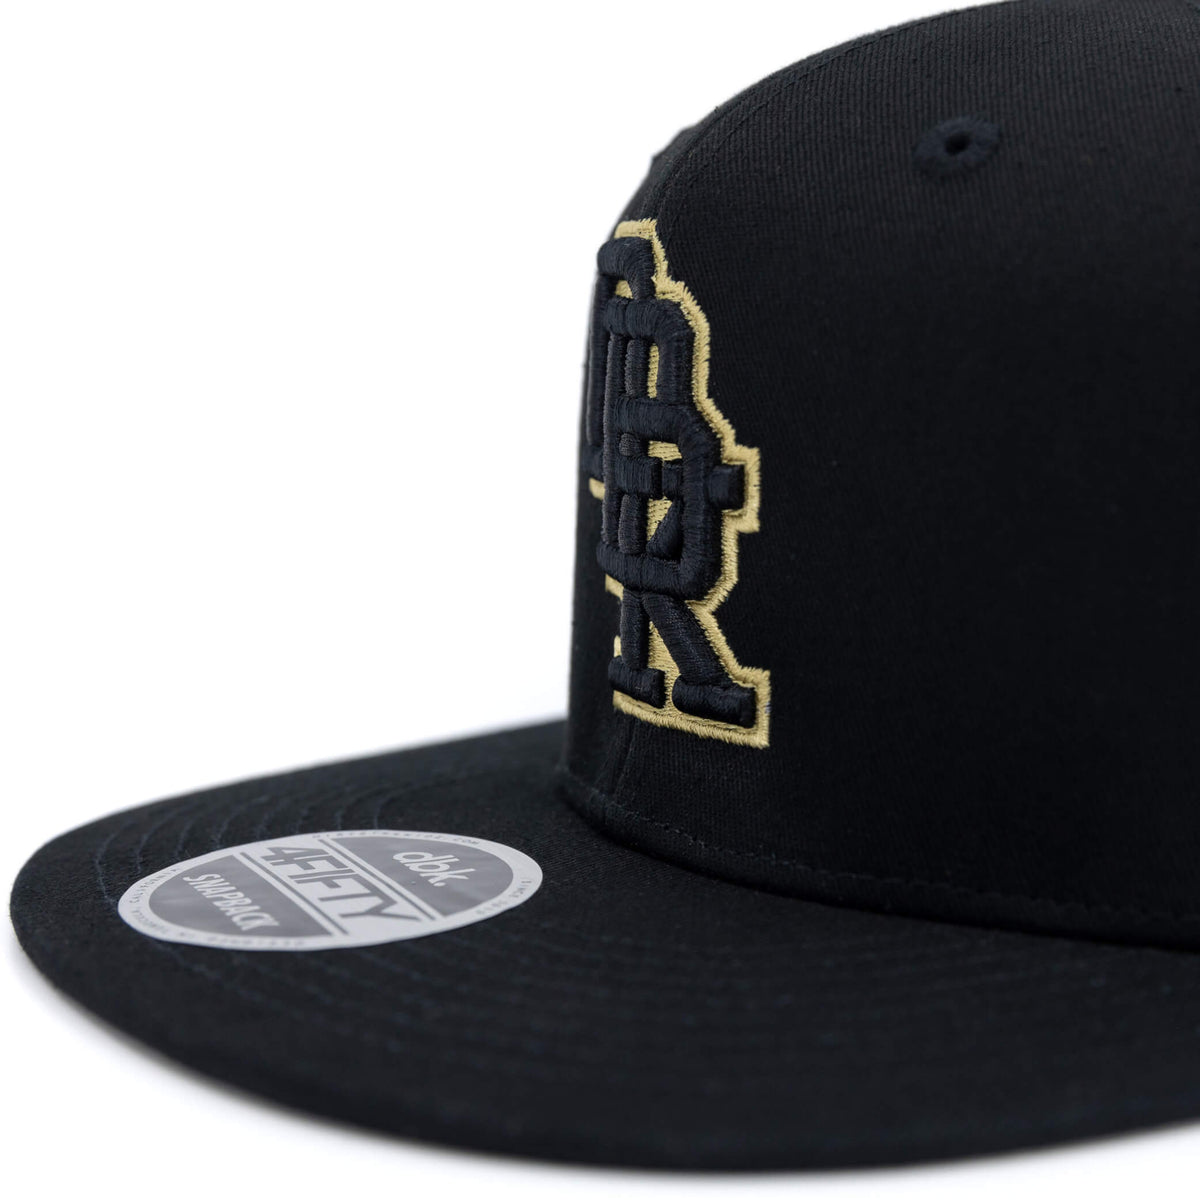 White Sox Fitted - - Image 5 from Eazy Duz It